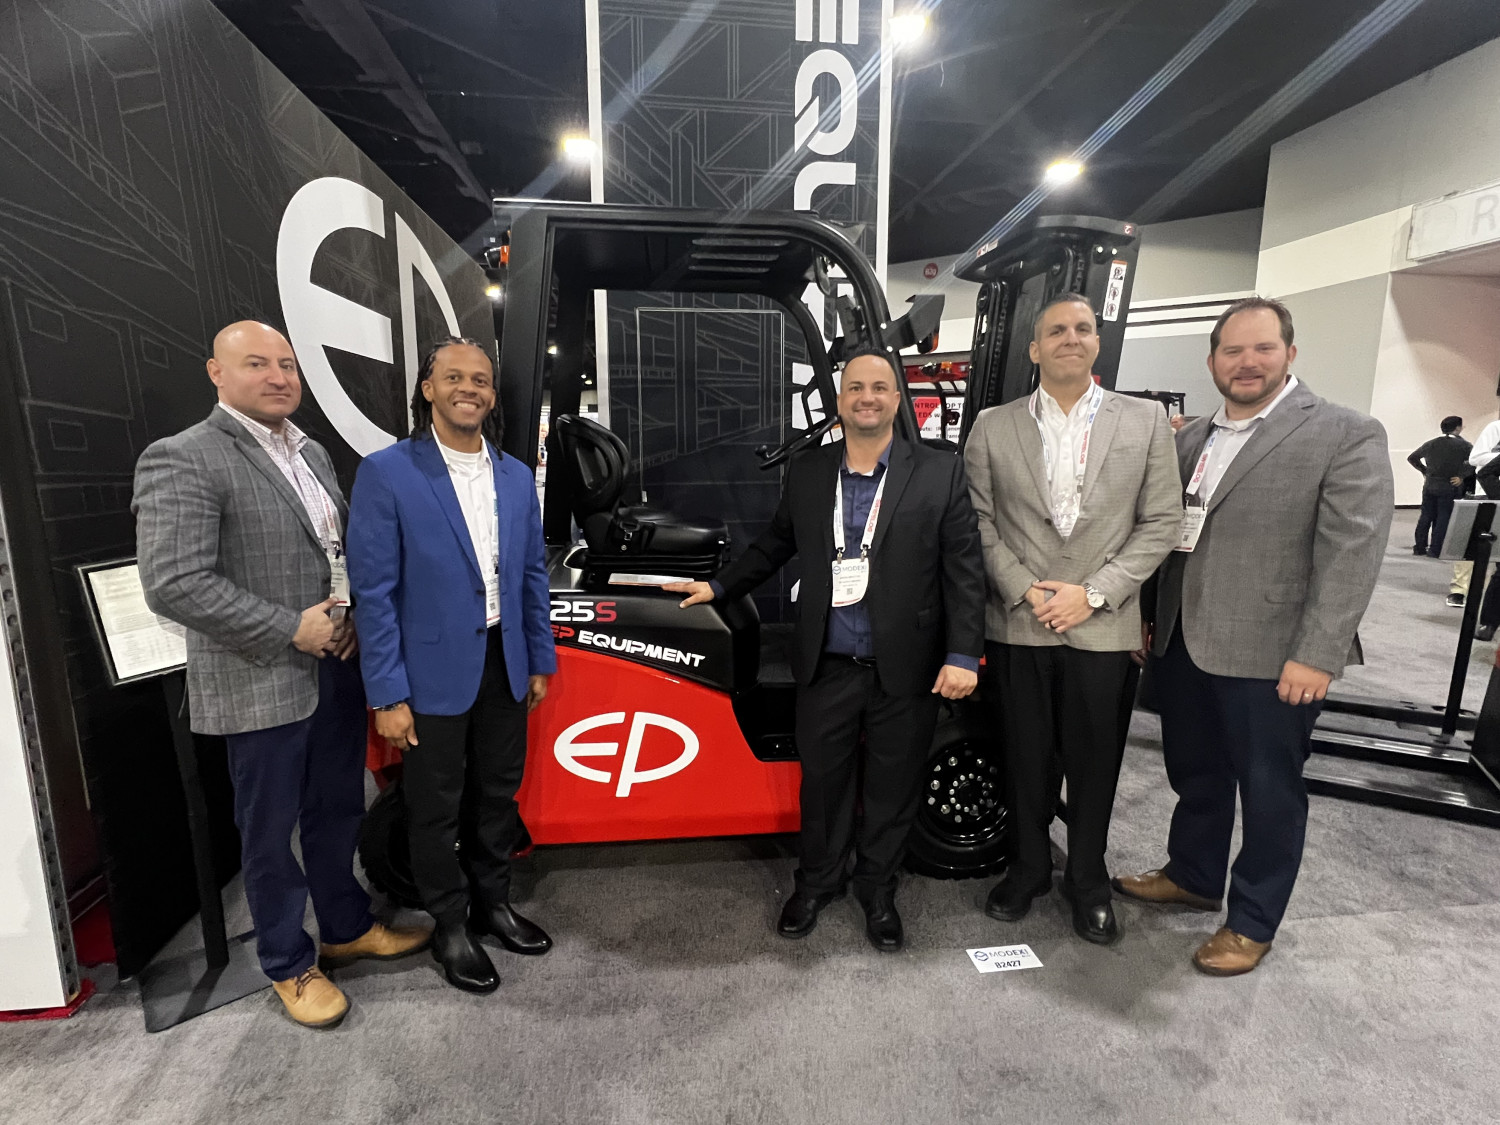 The EP North America team is showcasing the company's 4-Wheel Pneumatic Forklift at Modex.
